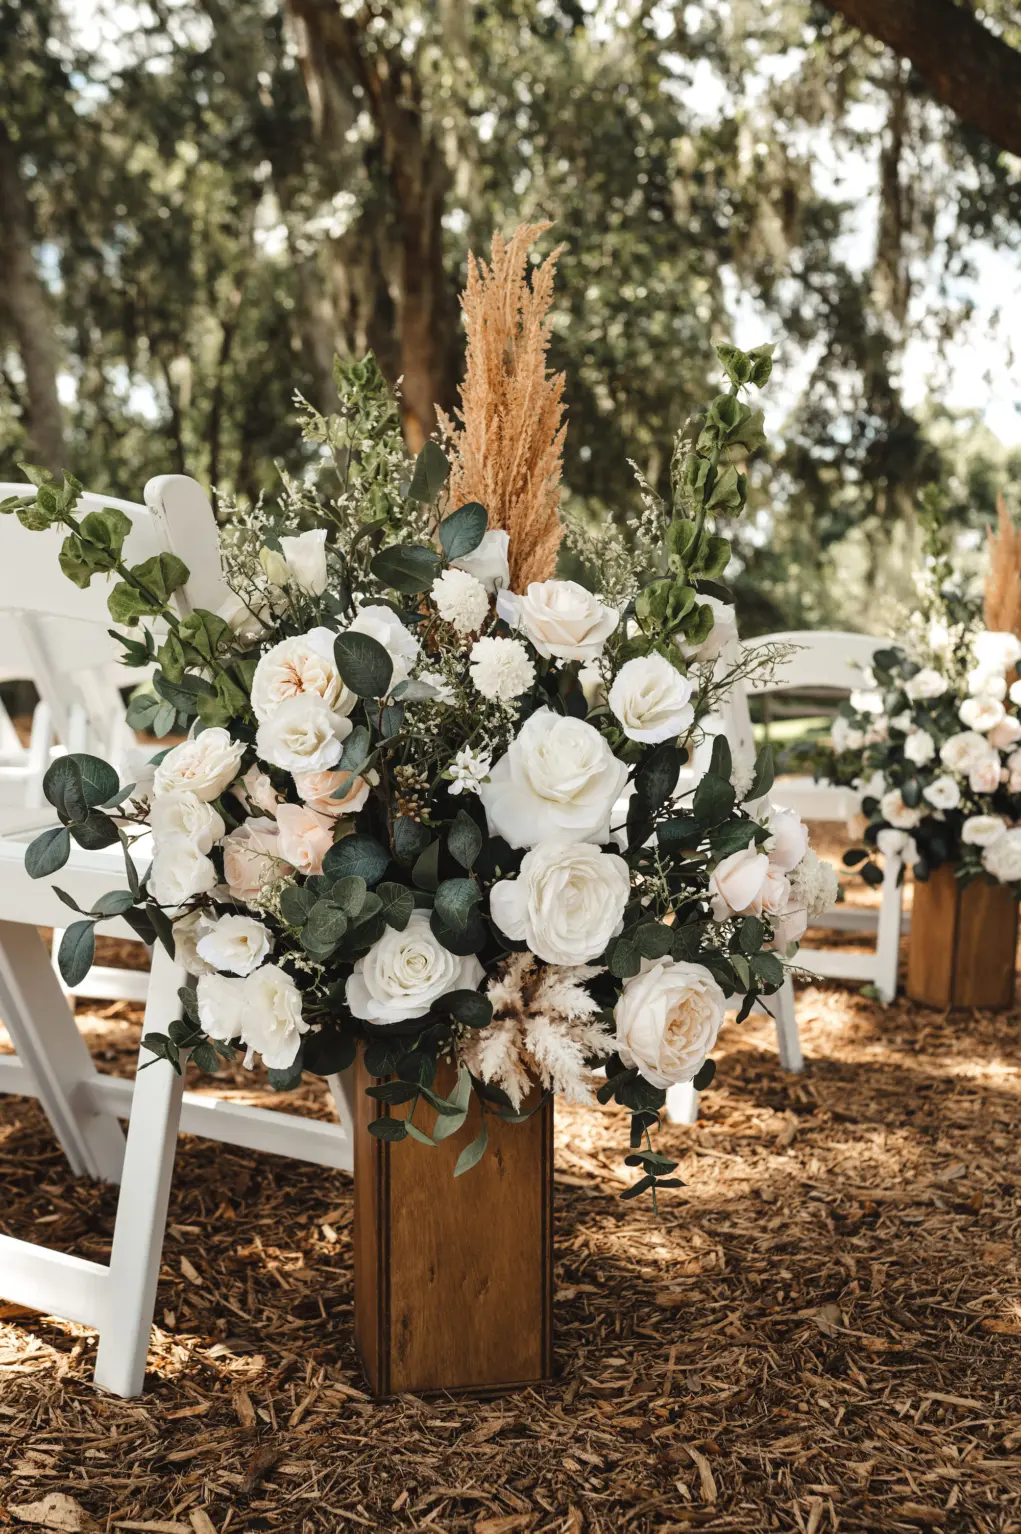 White and Blush Roses Ideas, Greenery and Wooden Flower Vase with Pampas Grass Flower Arrangements for Wedding Ceremony Aisle | Tampa Bay Florist Monarch Events and Design